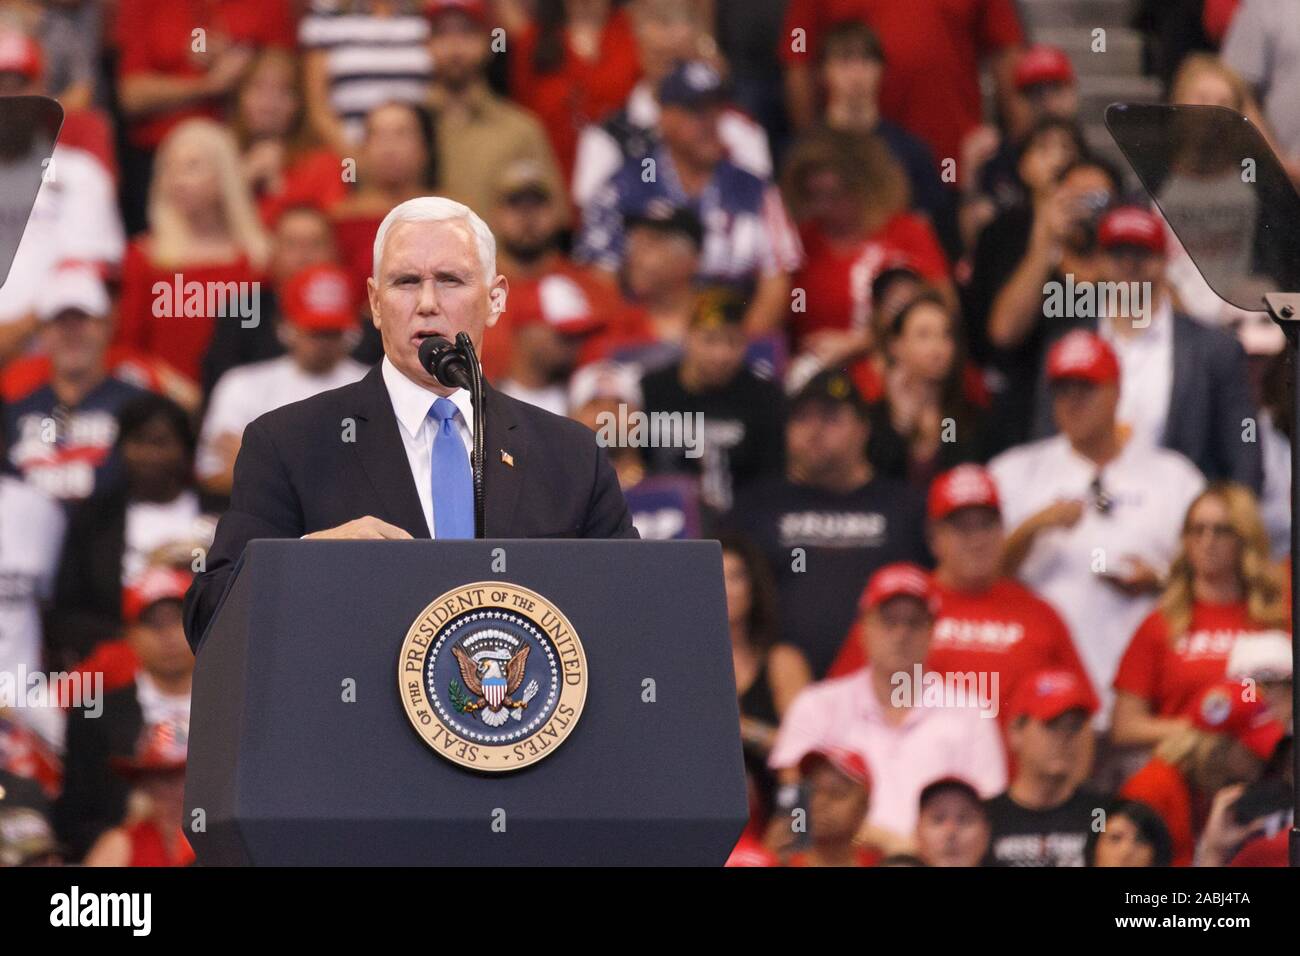 Sunrise, USA. 26th Nov, 2019. Vice President Mike Pence speaking at the 2020 Keep America Great Rally at the BB&T Center on November 26 2019 in Sunrise, Florida. Credit: The Photo Access/Alamy Live News Stock Photo